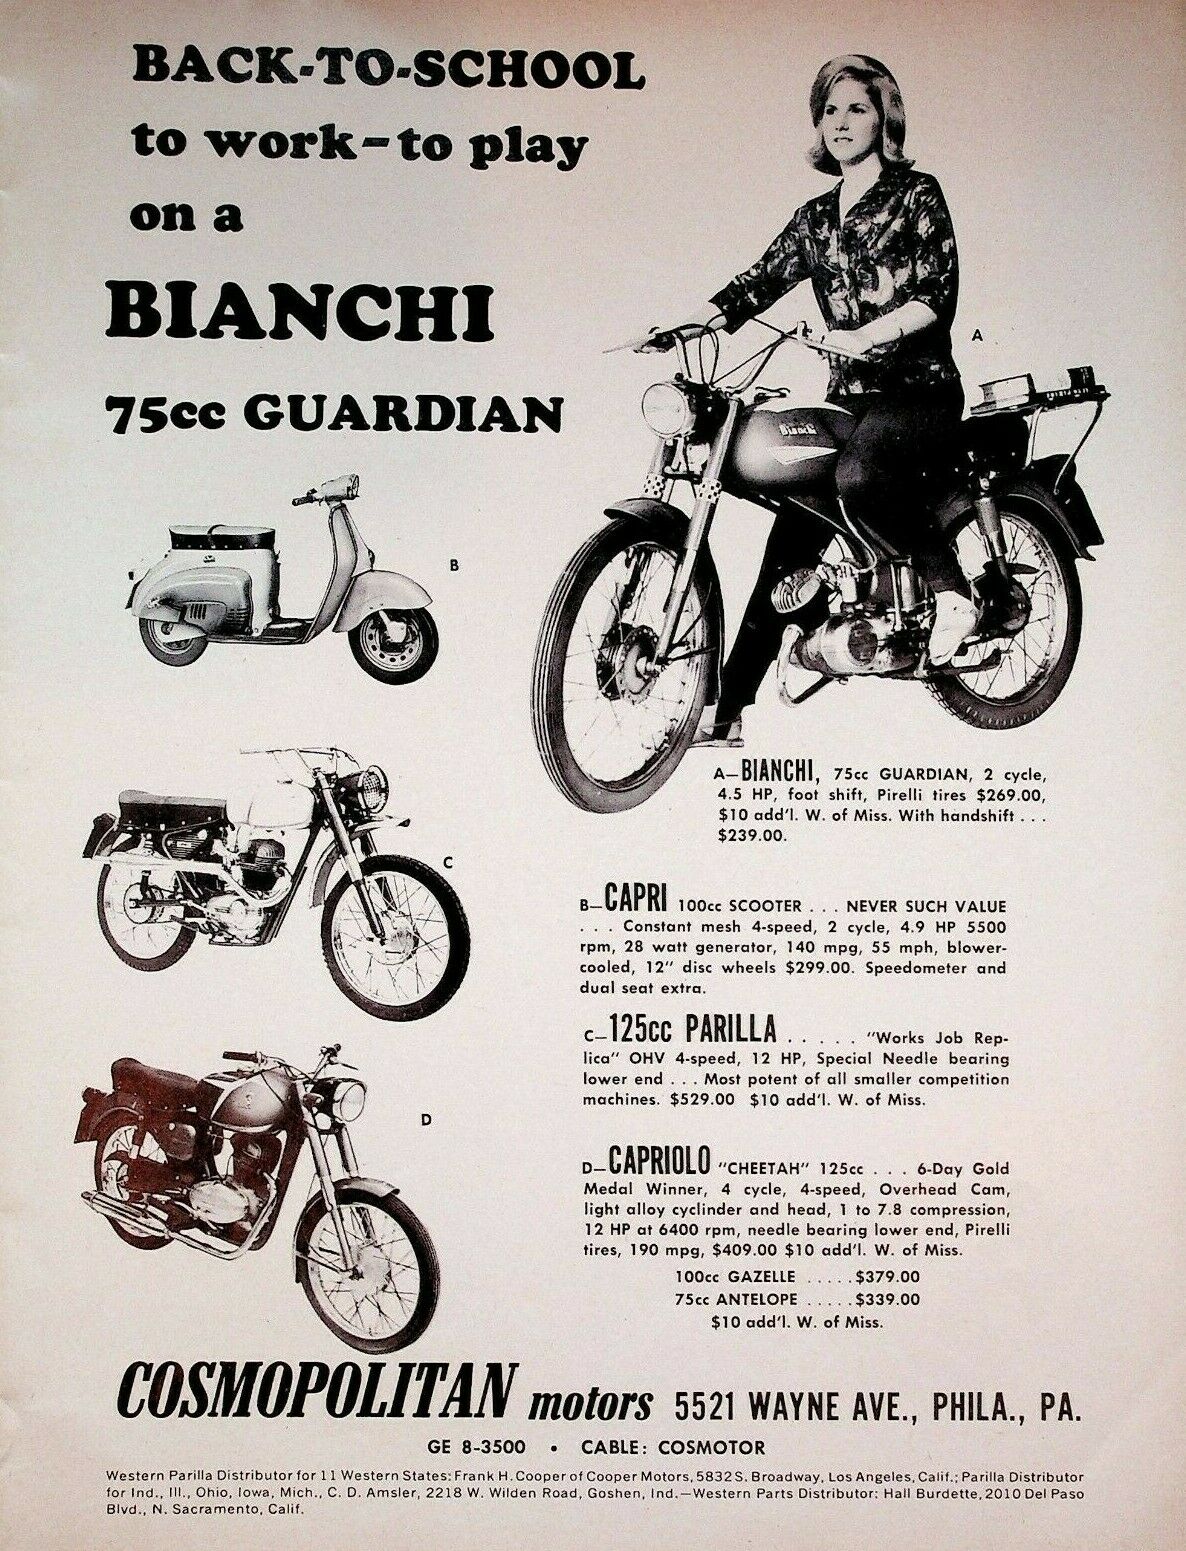 1964 Bianchi 75cc Guardian, Capri Scooter & More - Vintage Motorcycle Ad